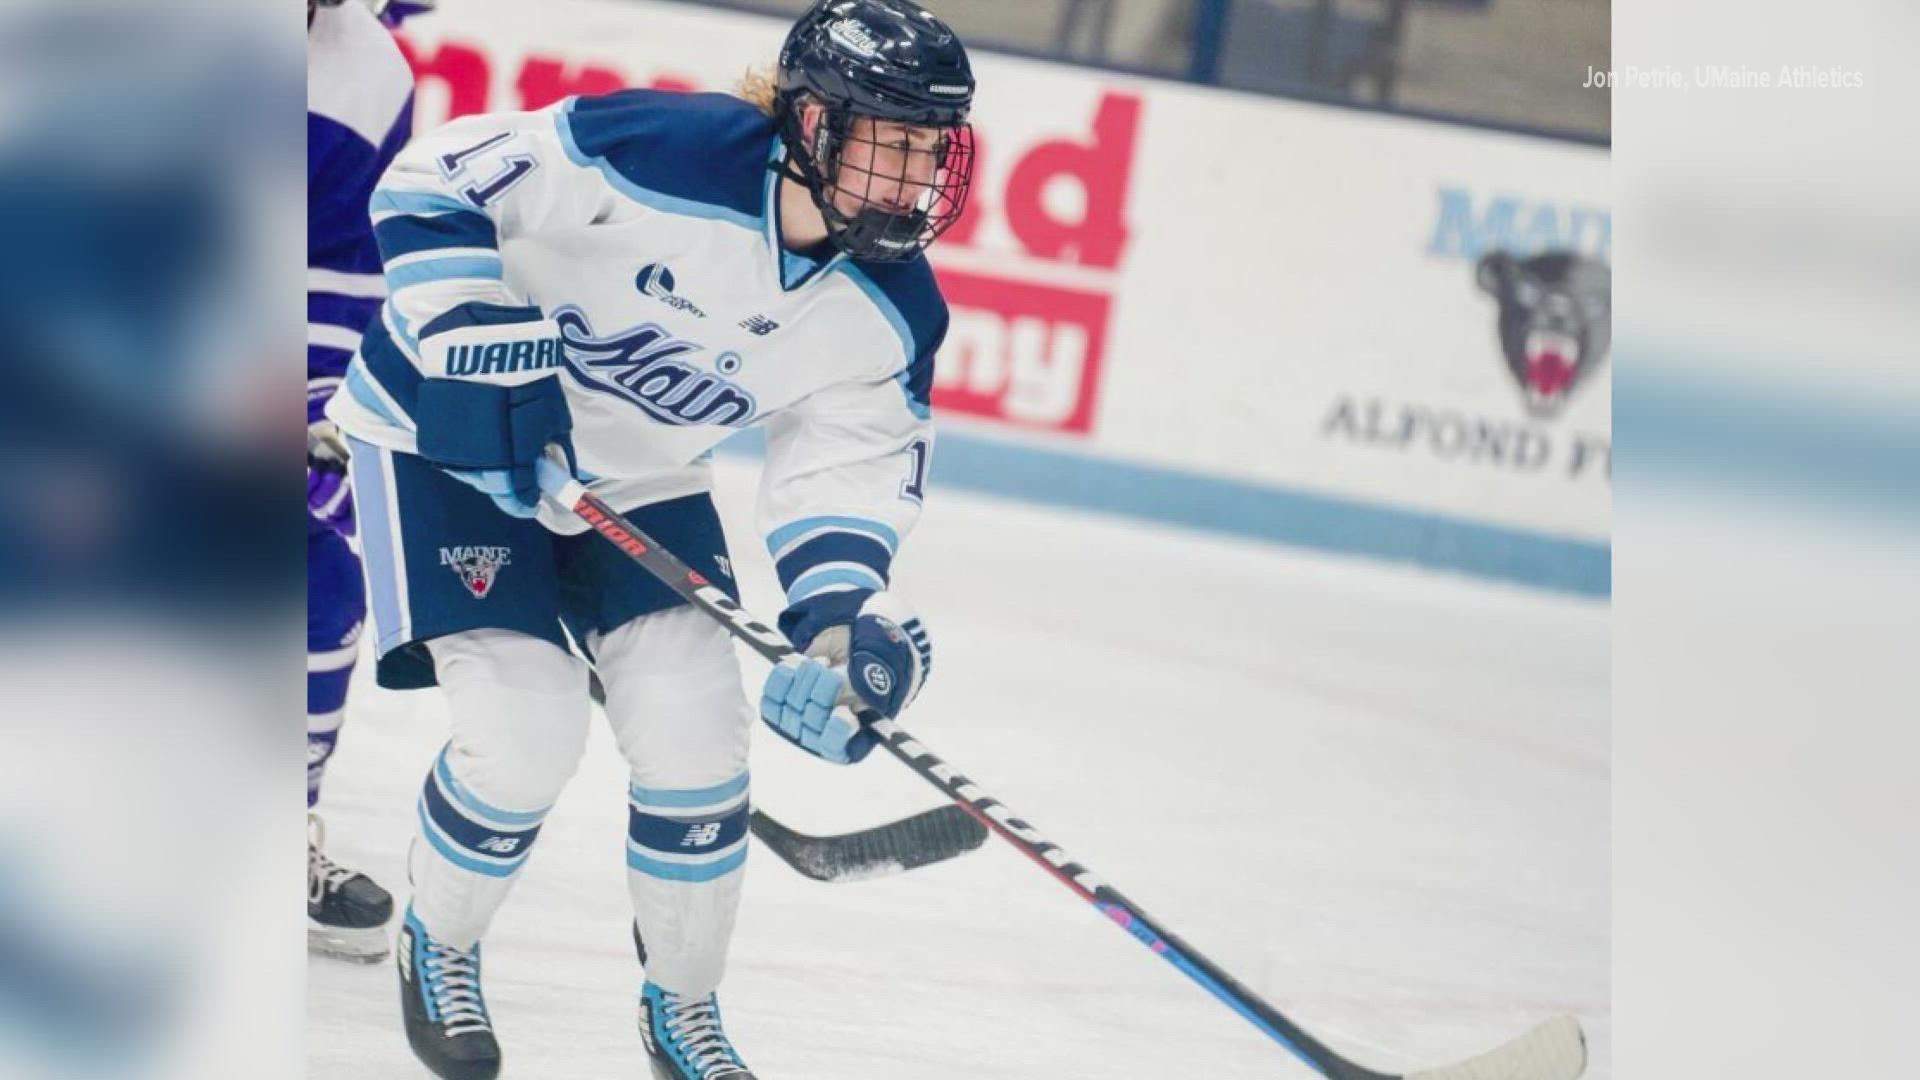 Amalie Andersen and Rahel Enzler will suit up for Denmark and Switzerland, respectively, in Beijing. For the two Black Bears, their childhood dream is coming true.